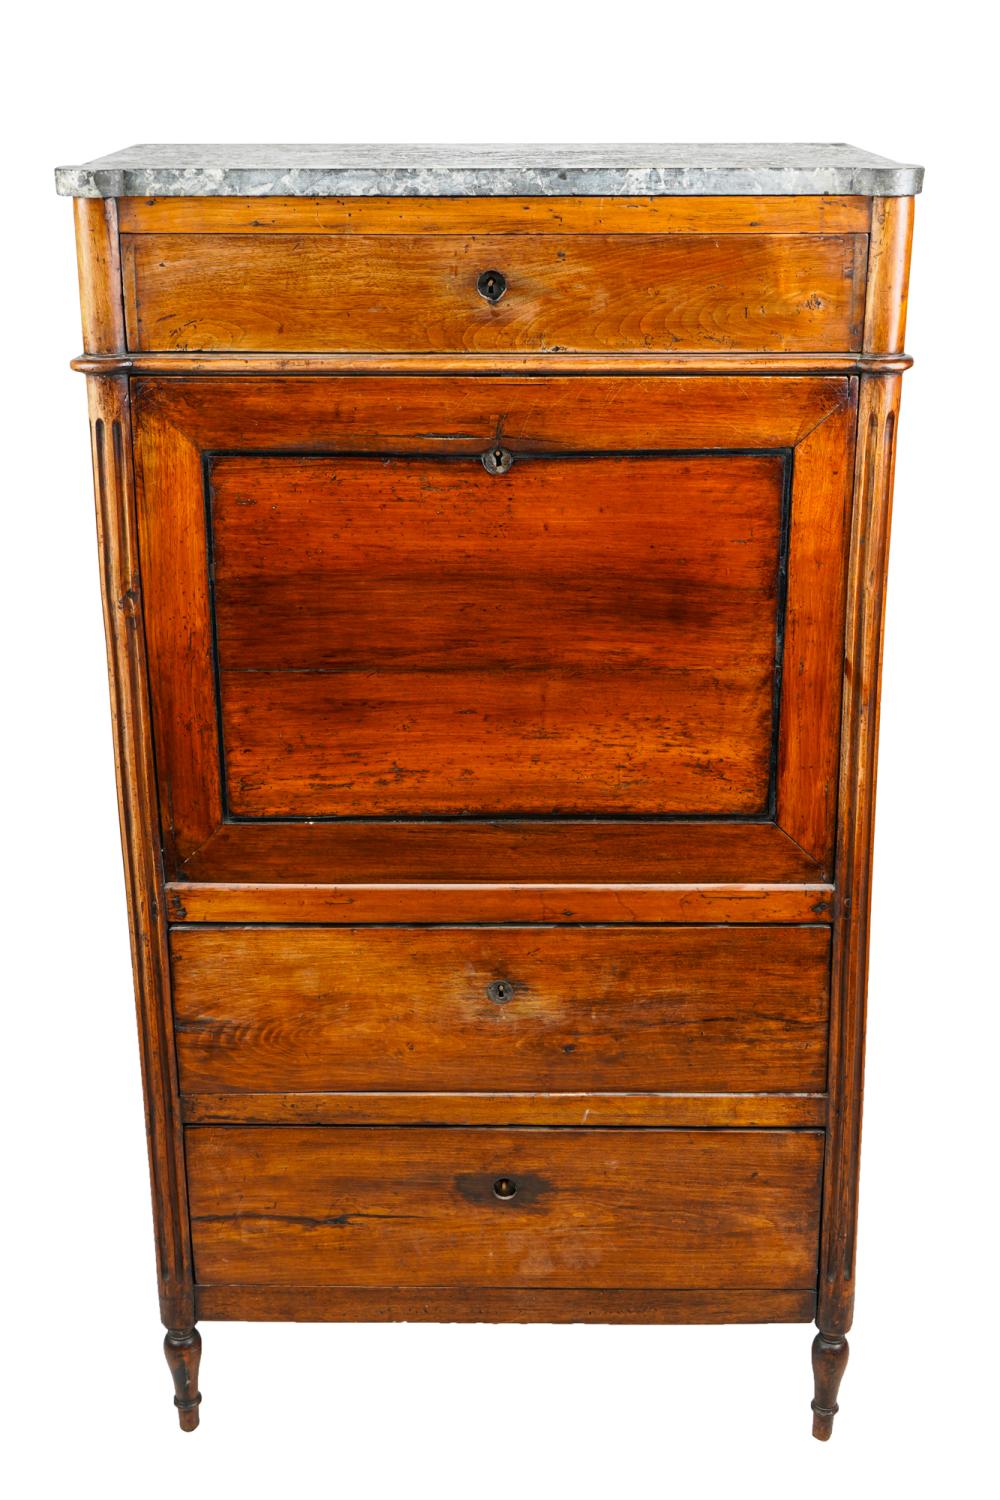 FRENCH FRUITWOOD MARBLE TOP SECRETAIRE 336bec